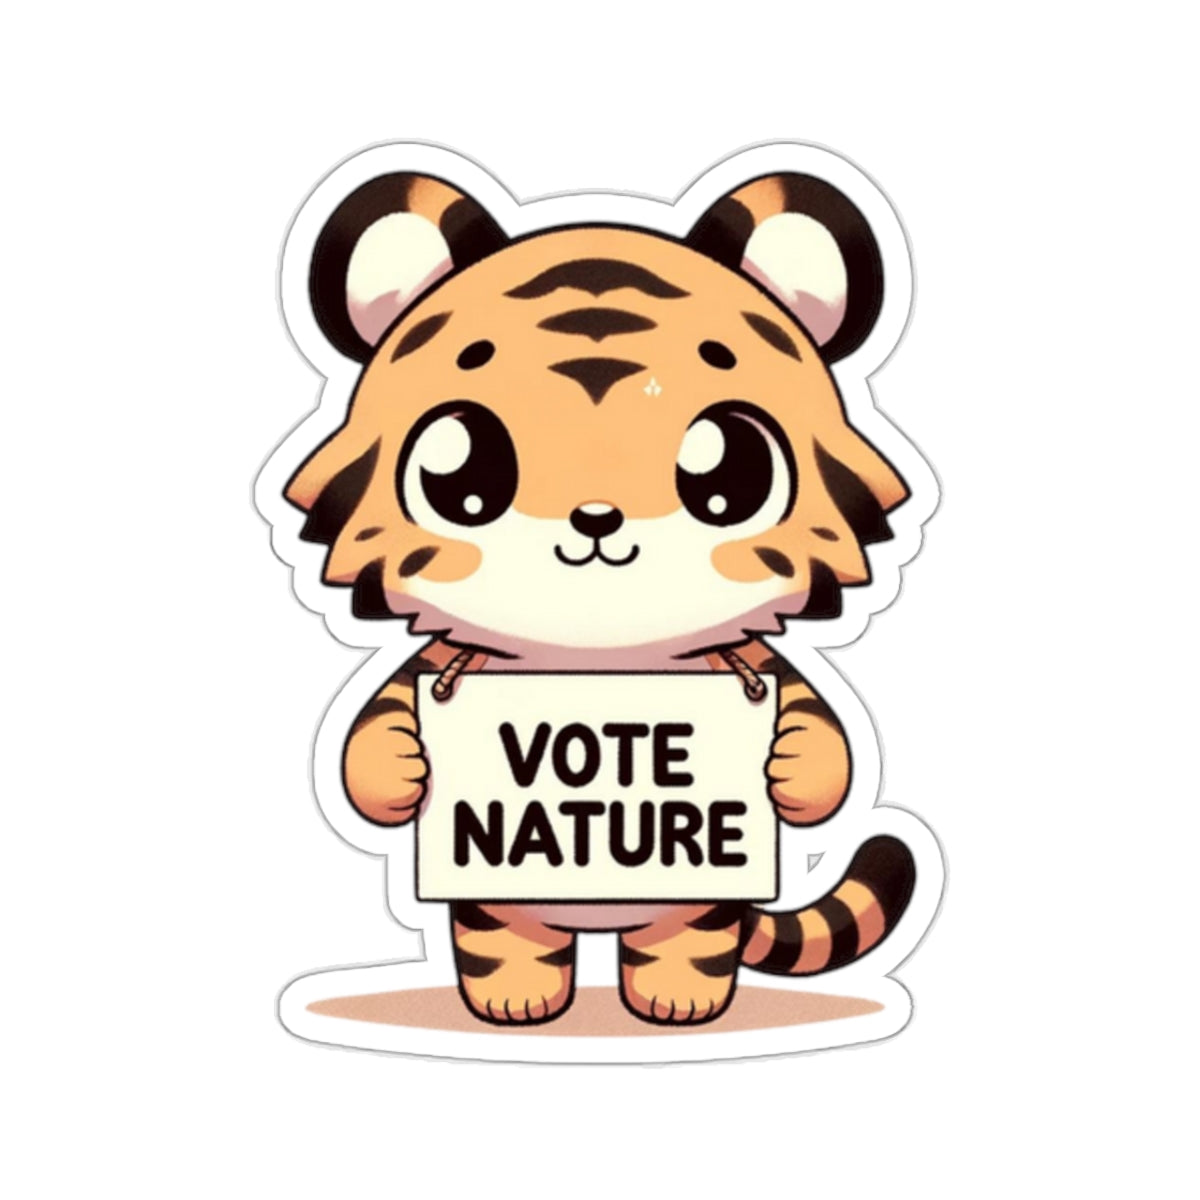 Inspirational Cute Tiger Statement vinyl Sticker: Vote Nature! for laptop, kindle, phone, ipad, instrument case, notebook, mood board